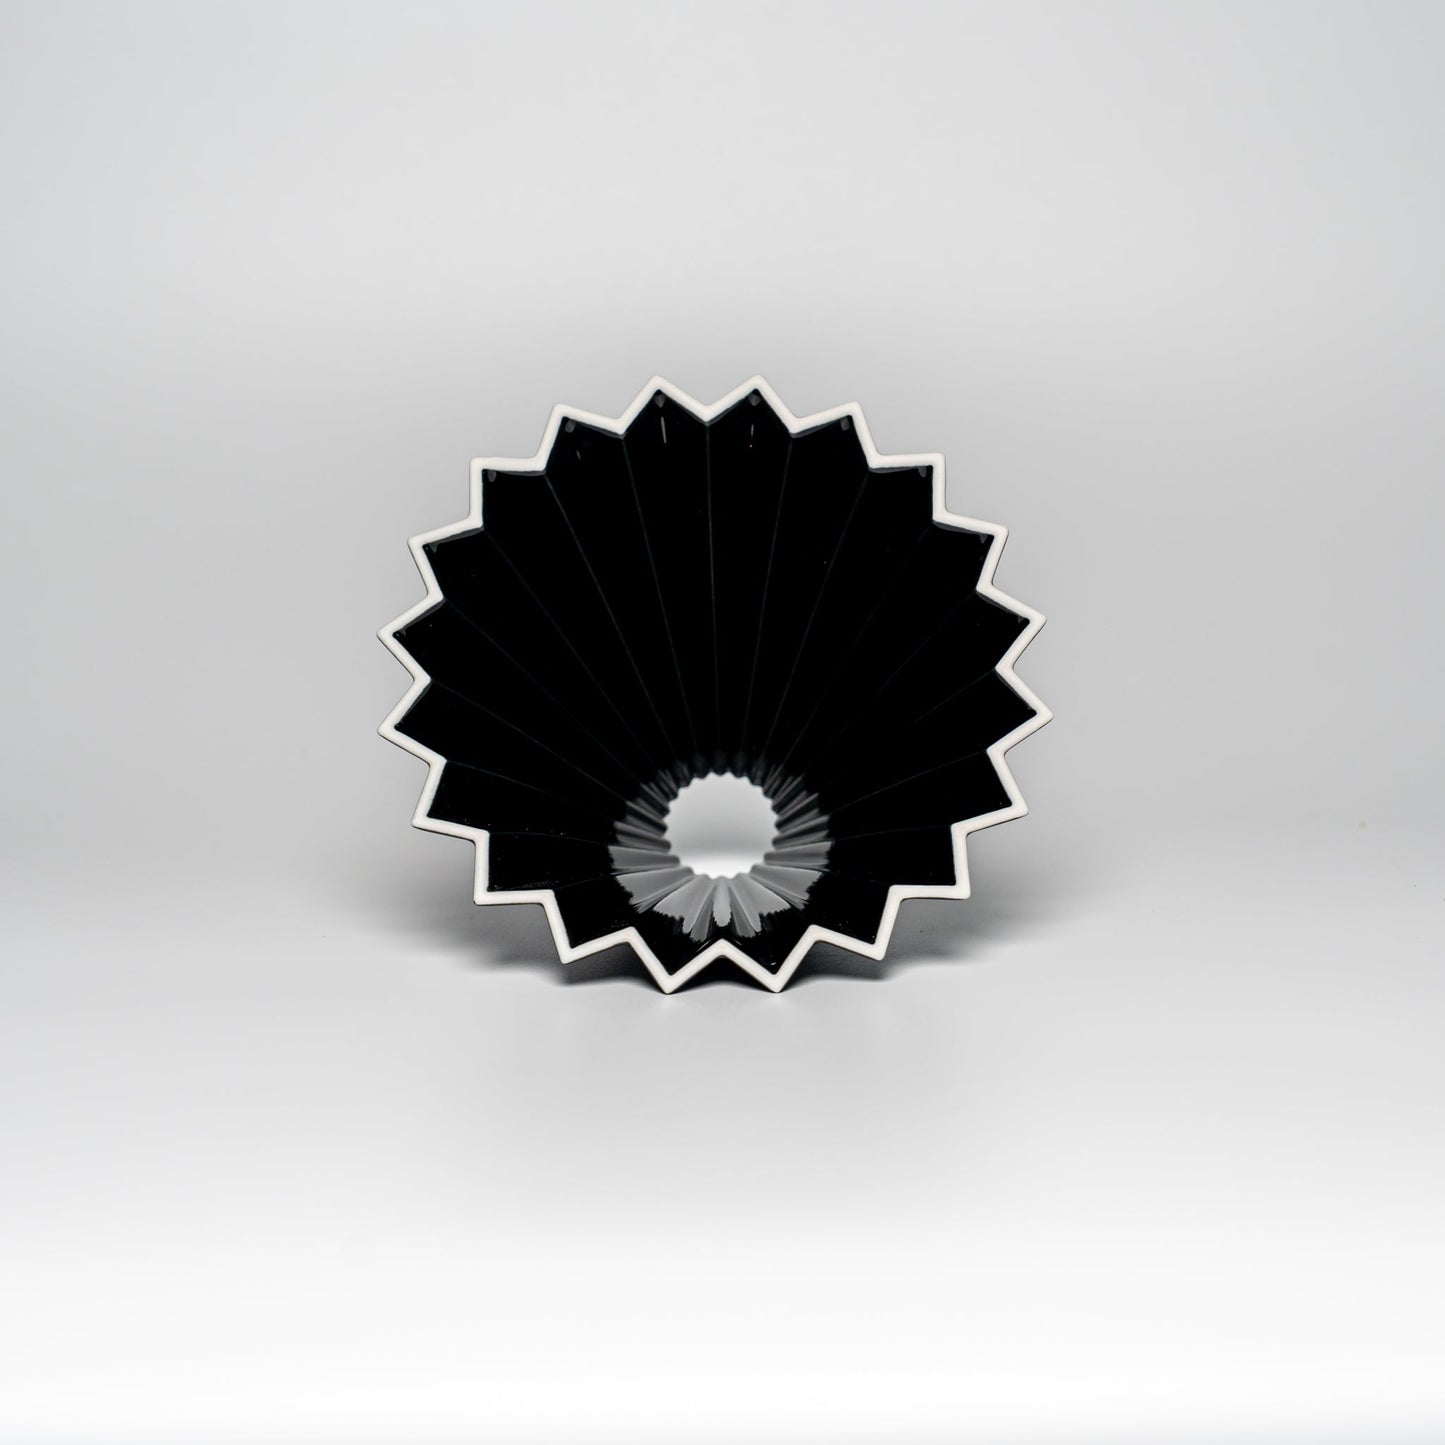 A black ORIGAMI coffee dripper on a white background